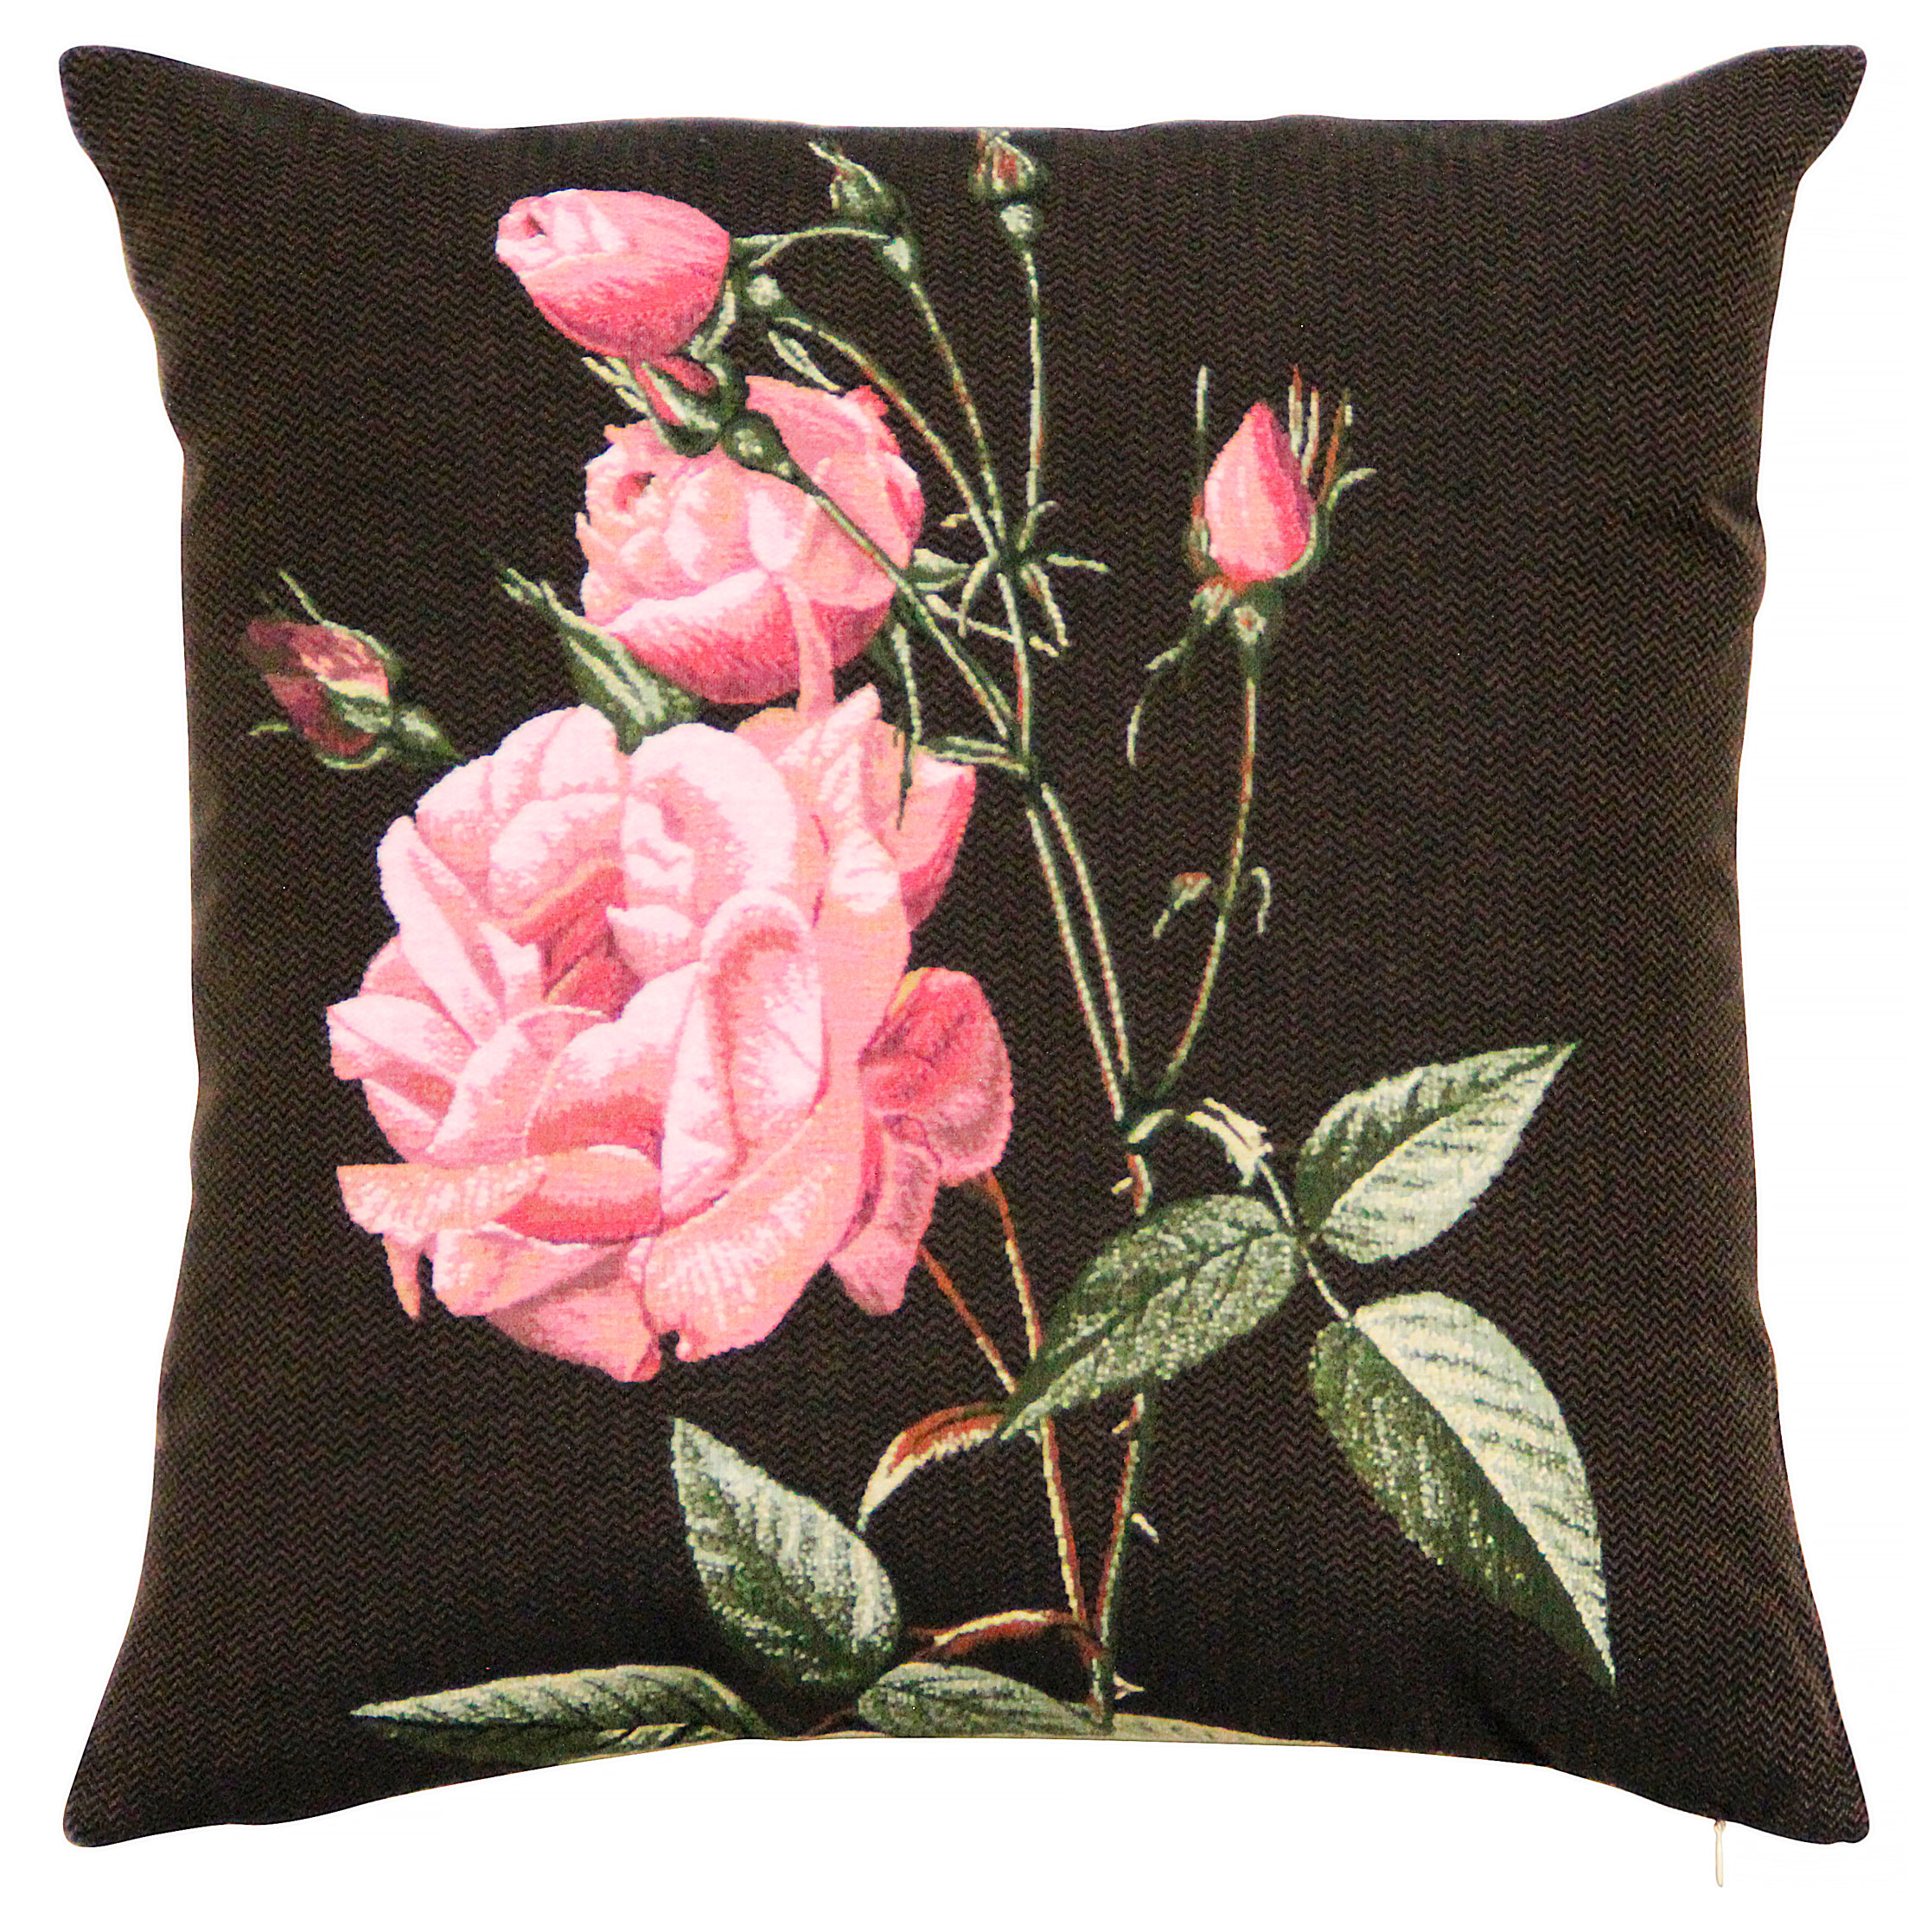 Pillow - Jane - Pink in Brown Background